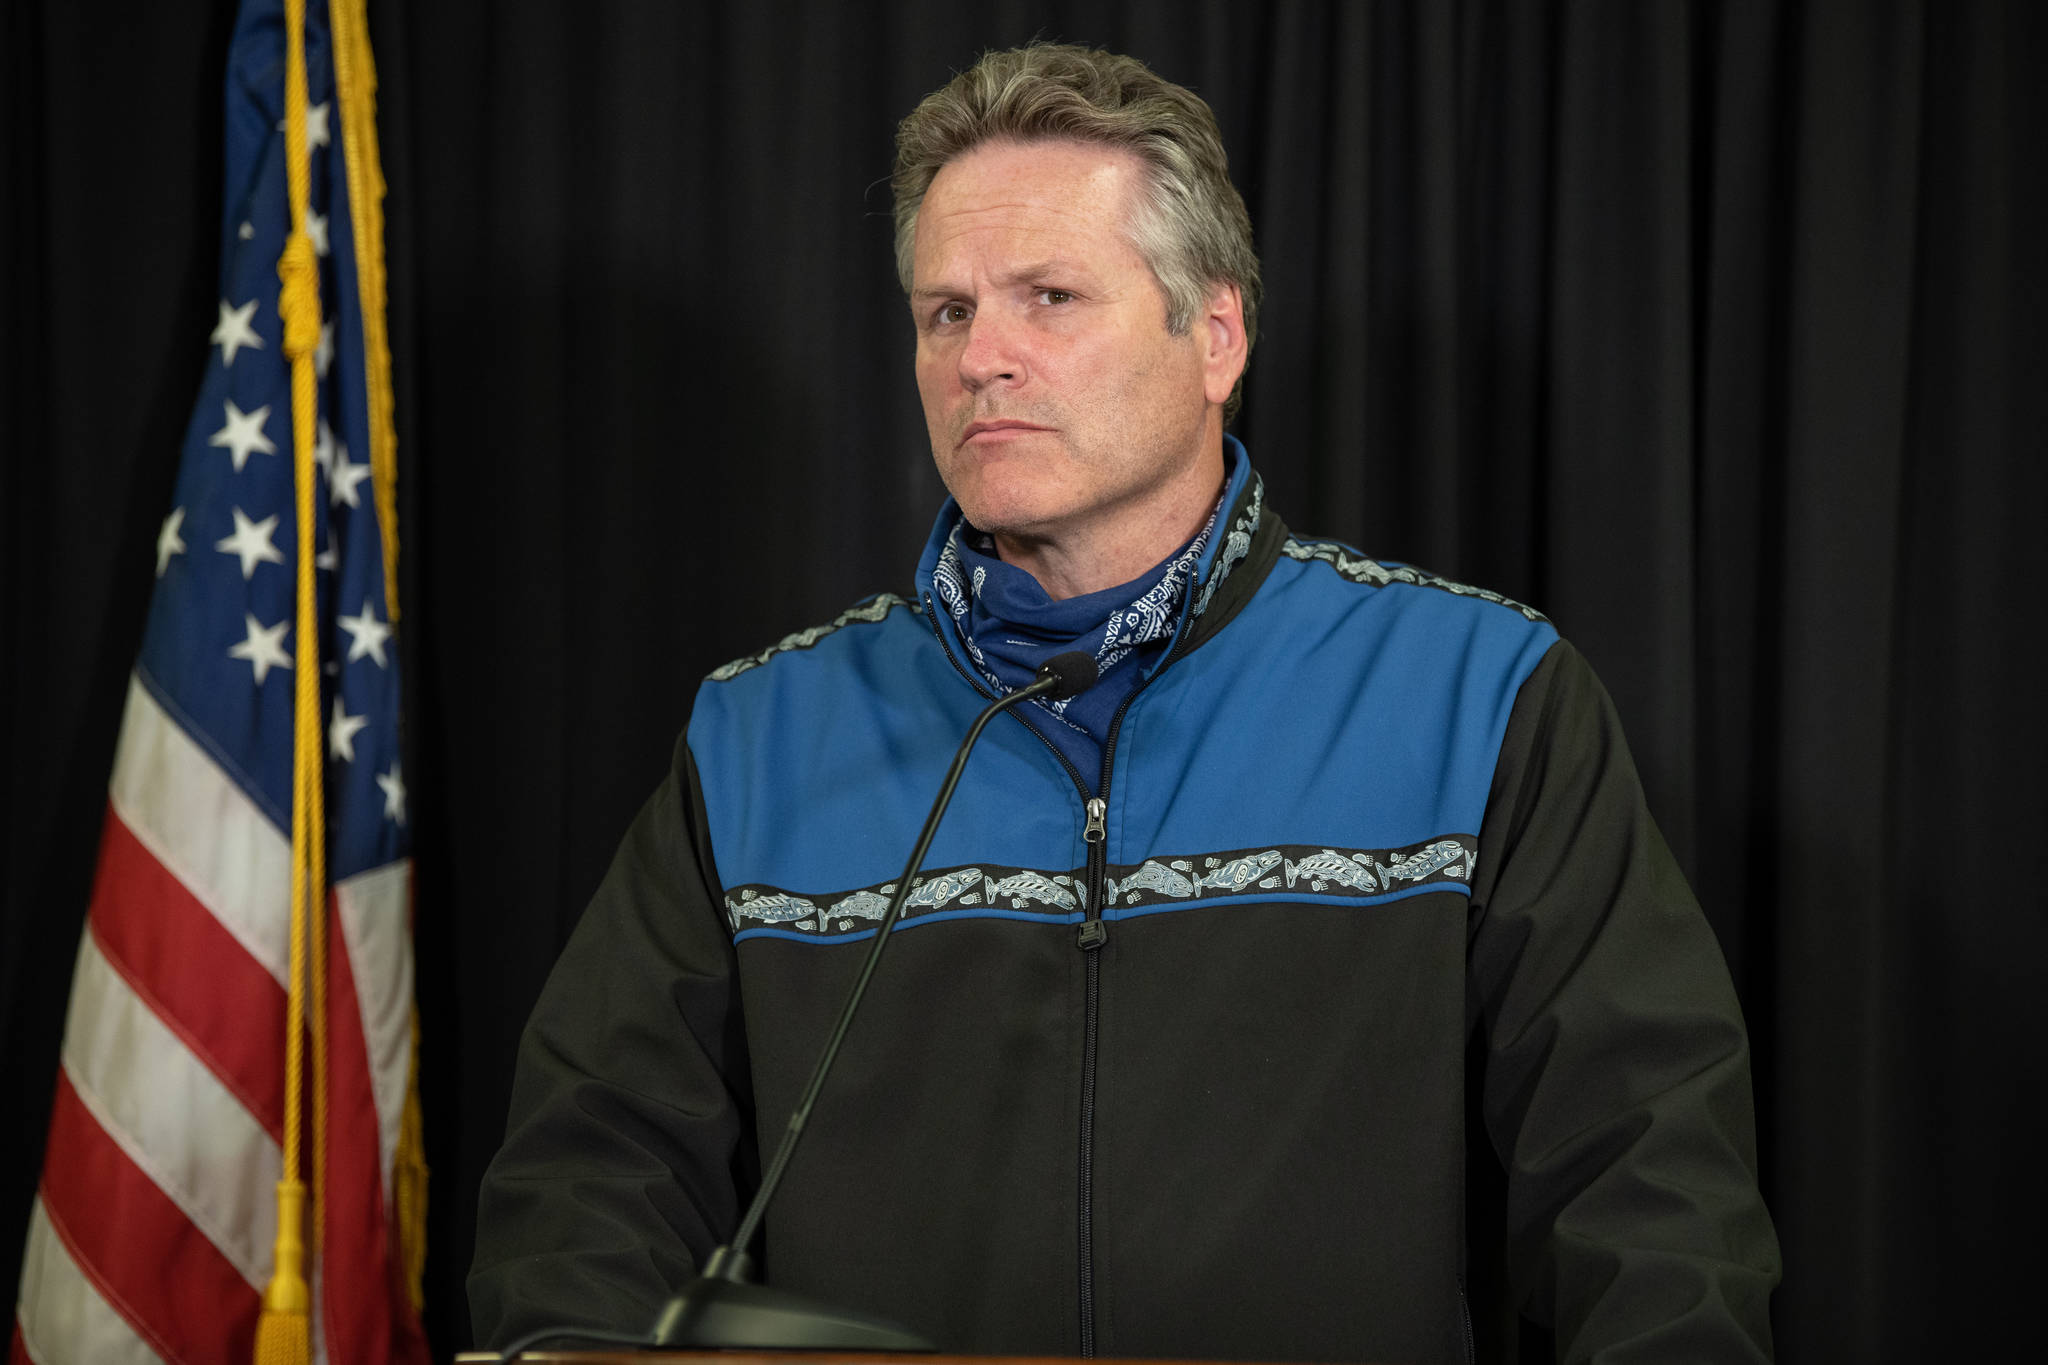 Gov. Mike Dunleavy wears a bandana while speaking at a June 30 press conference. (Courtesy Photo | Office of Gov. Mike Dunleavy)